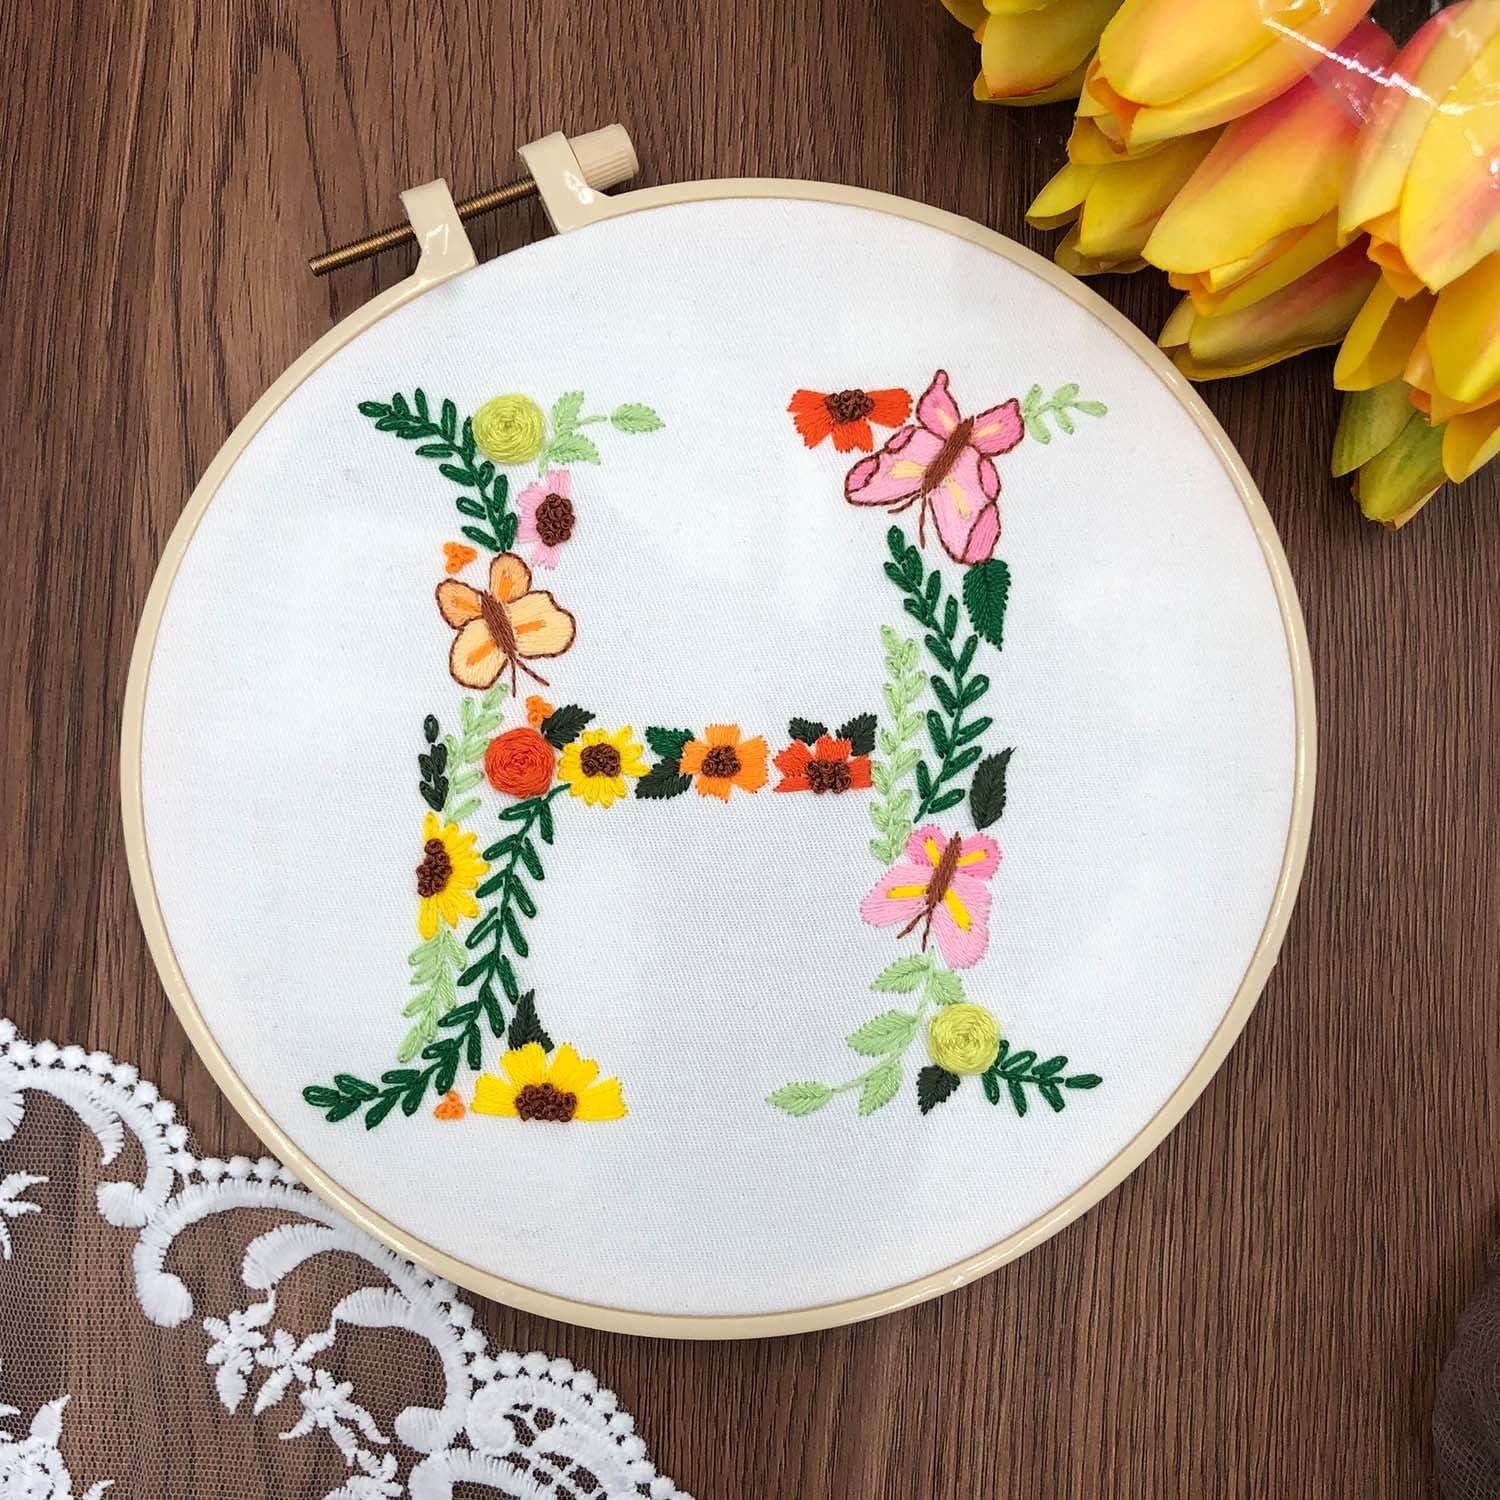 26 letters-embroidery ktclubs.com